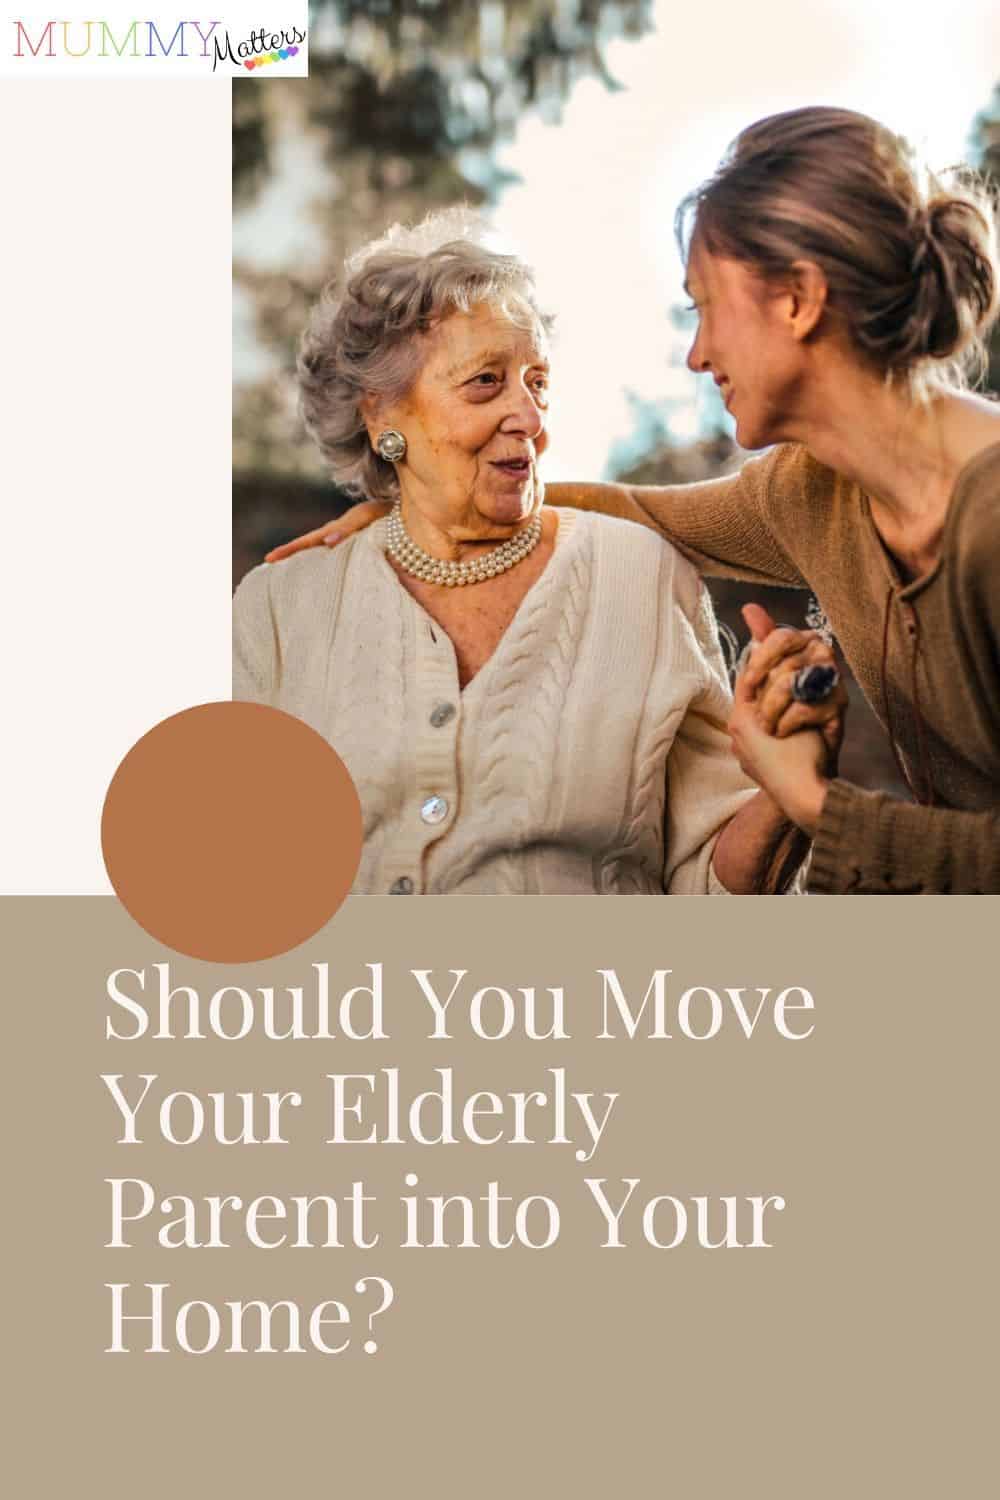 If you have elderly parents, you may want to take care of them in your home and make sure they’re well looked after. The following are things to consider.